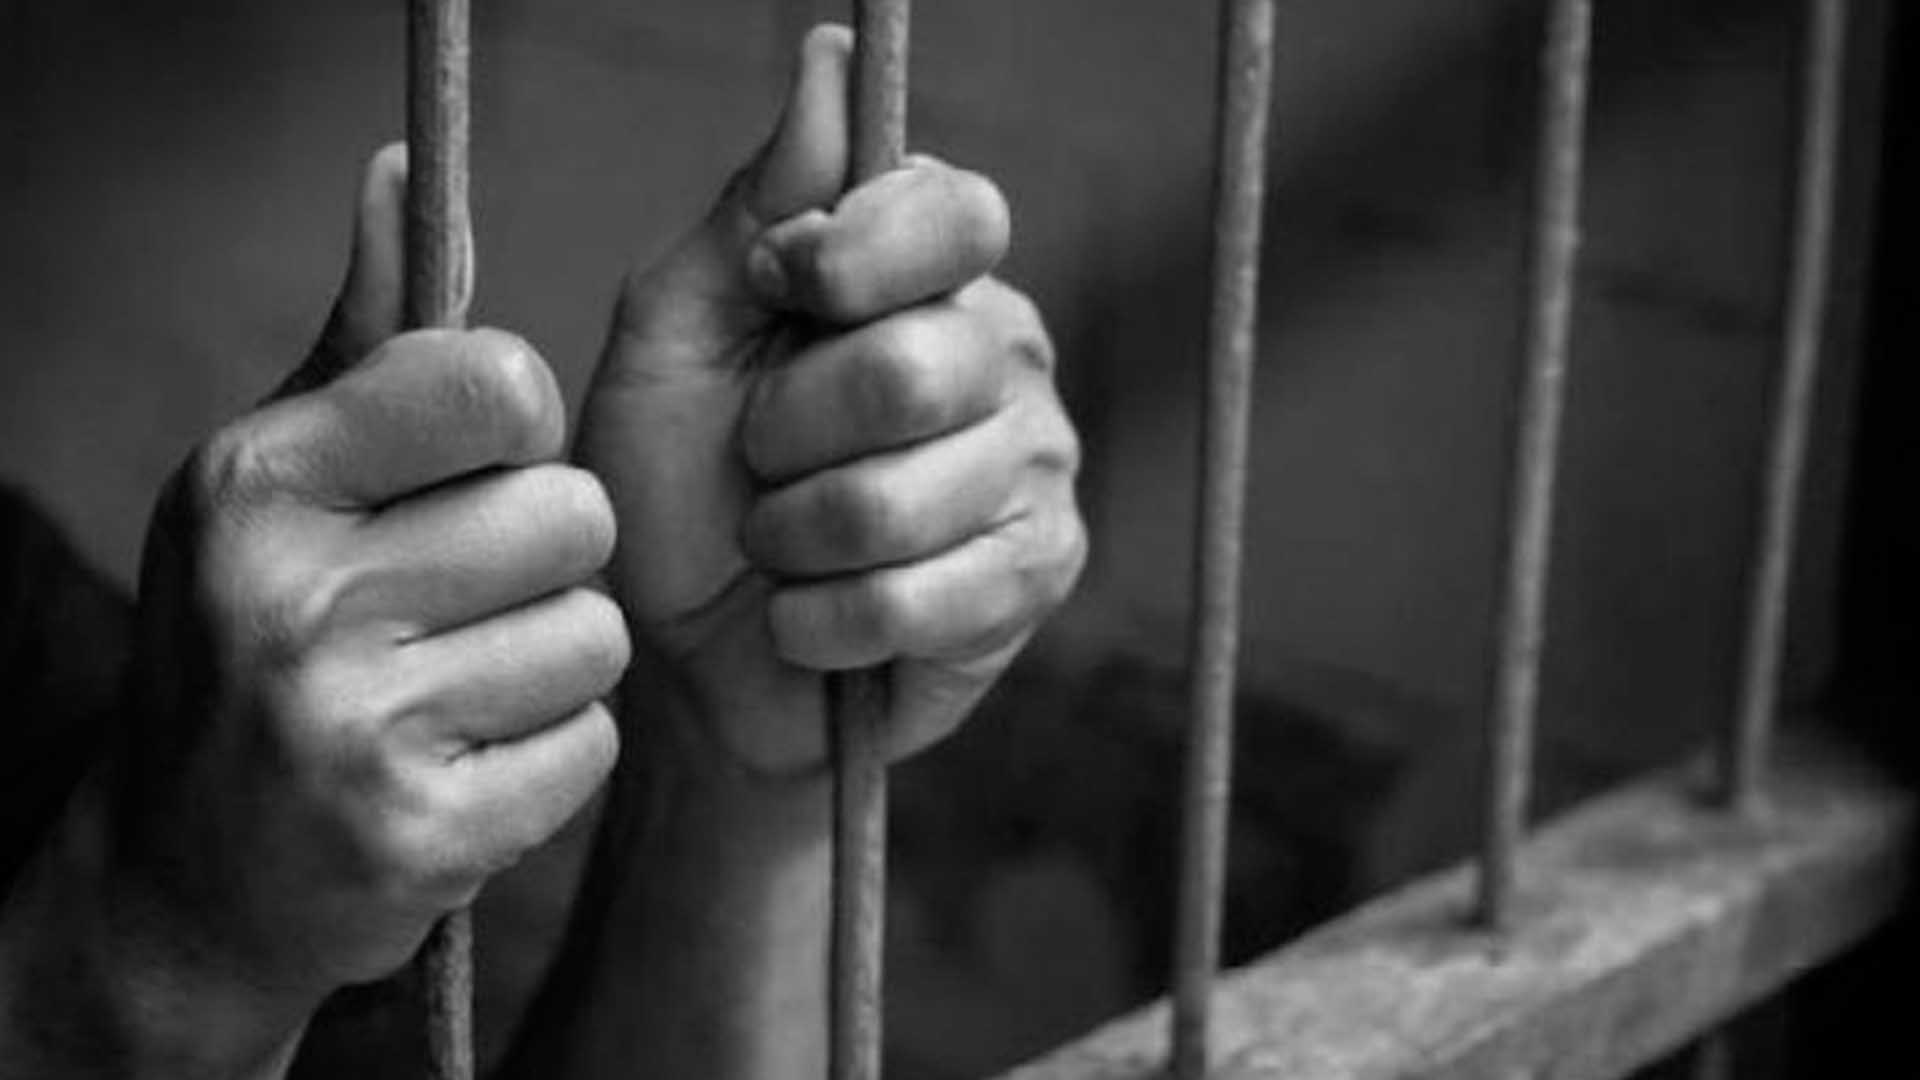 Acid smuggler jailed for 20 years, fined Rs 1 million